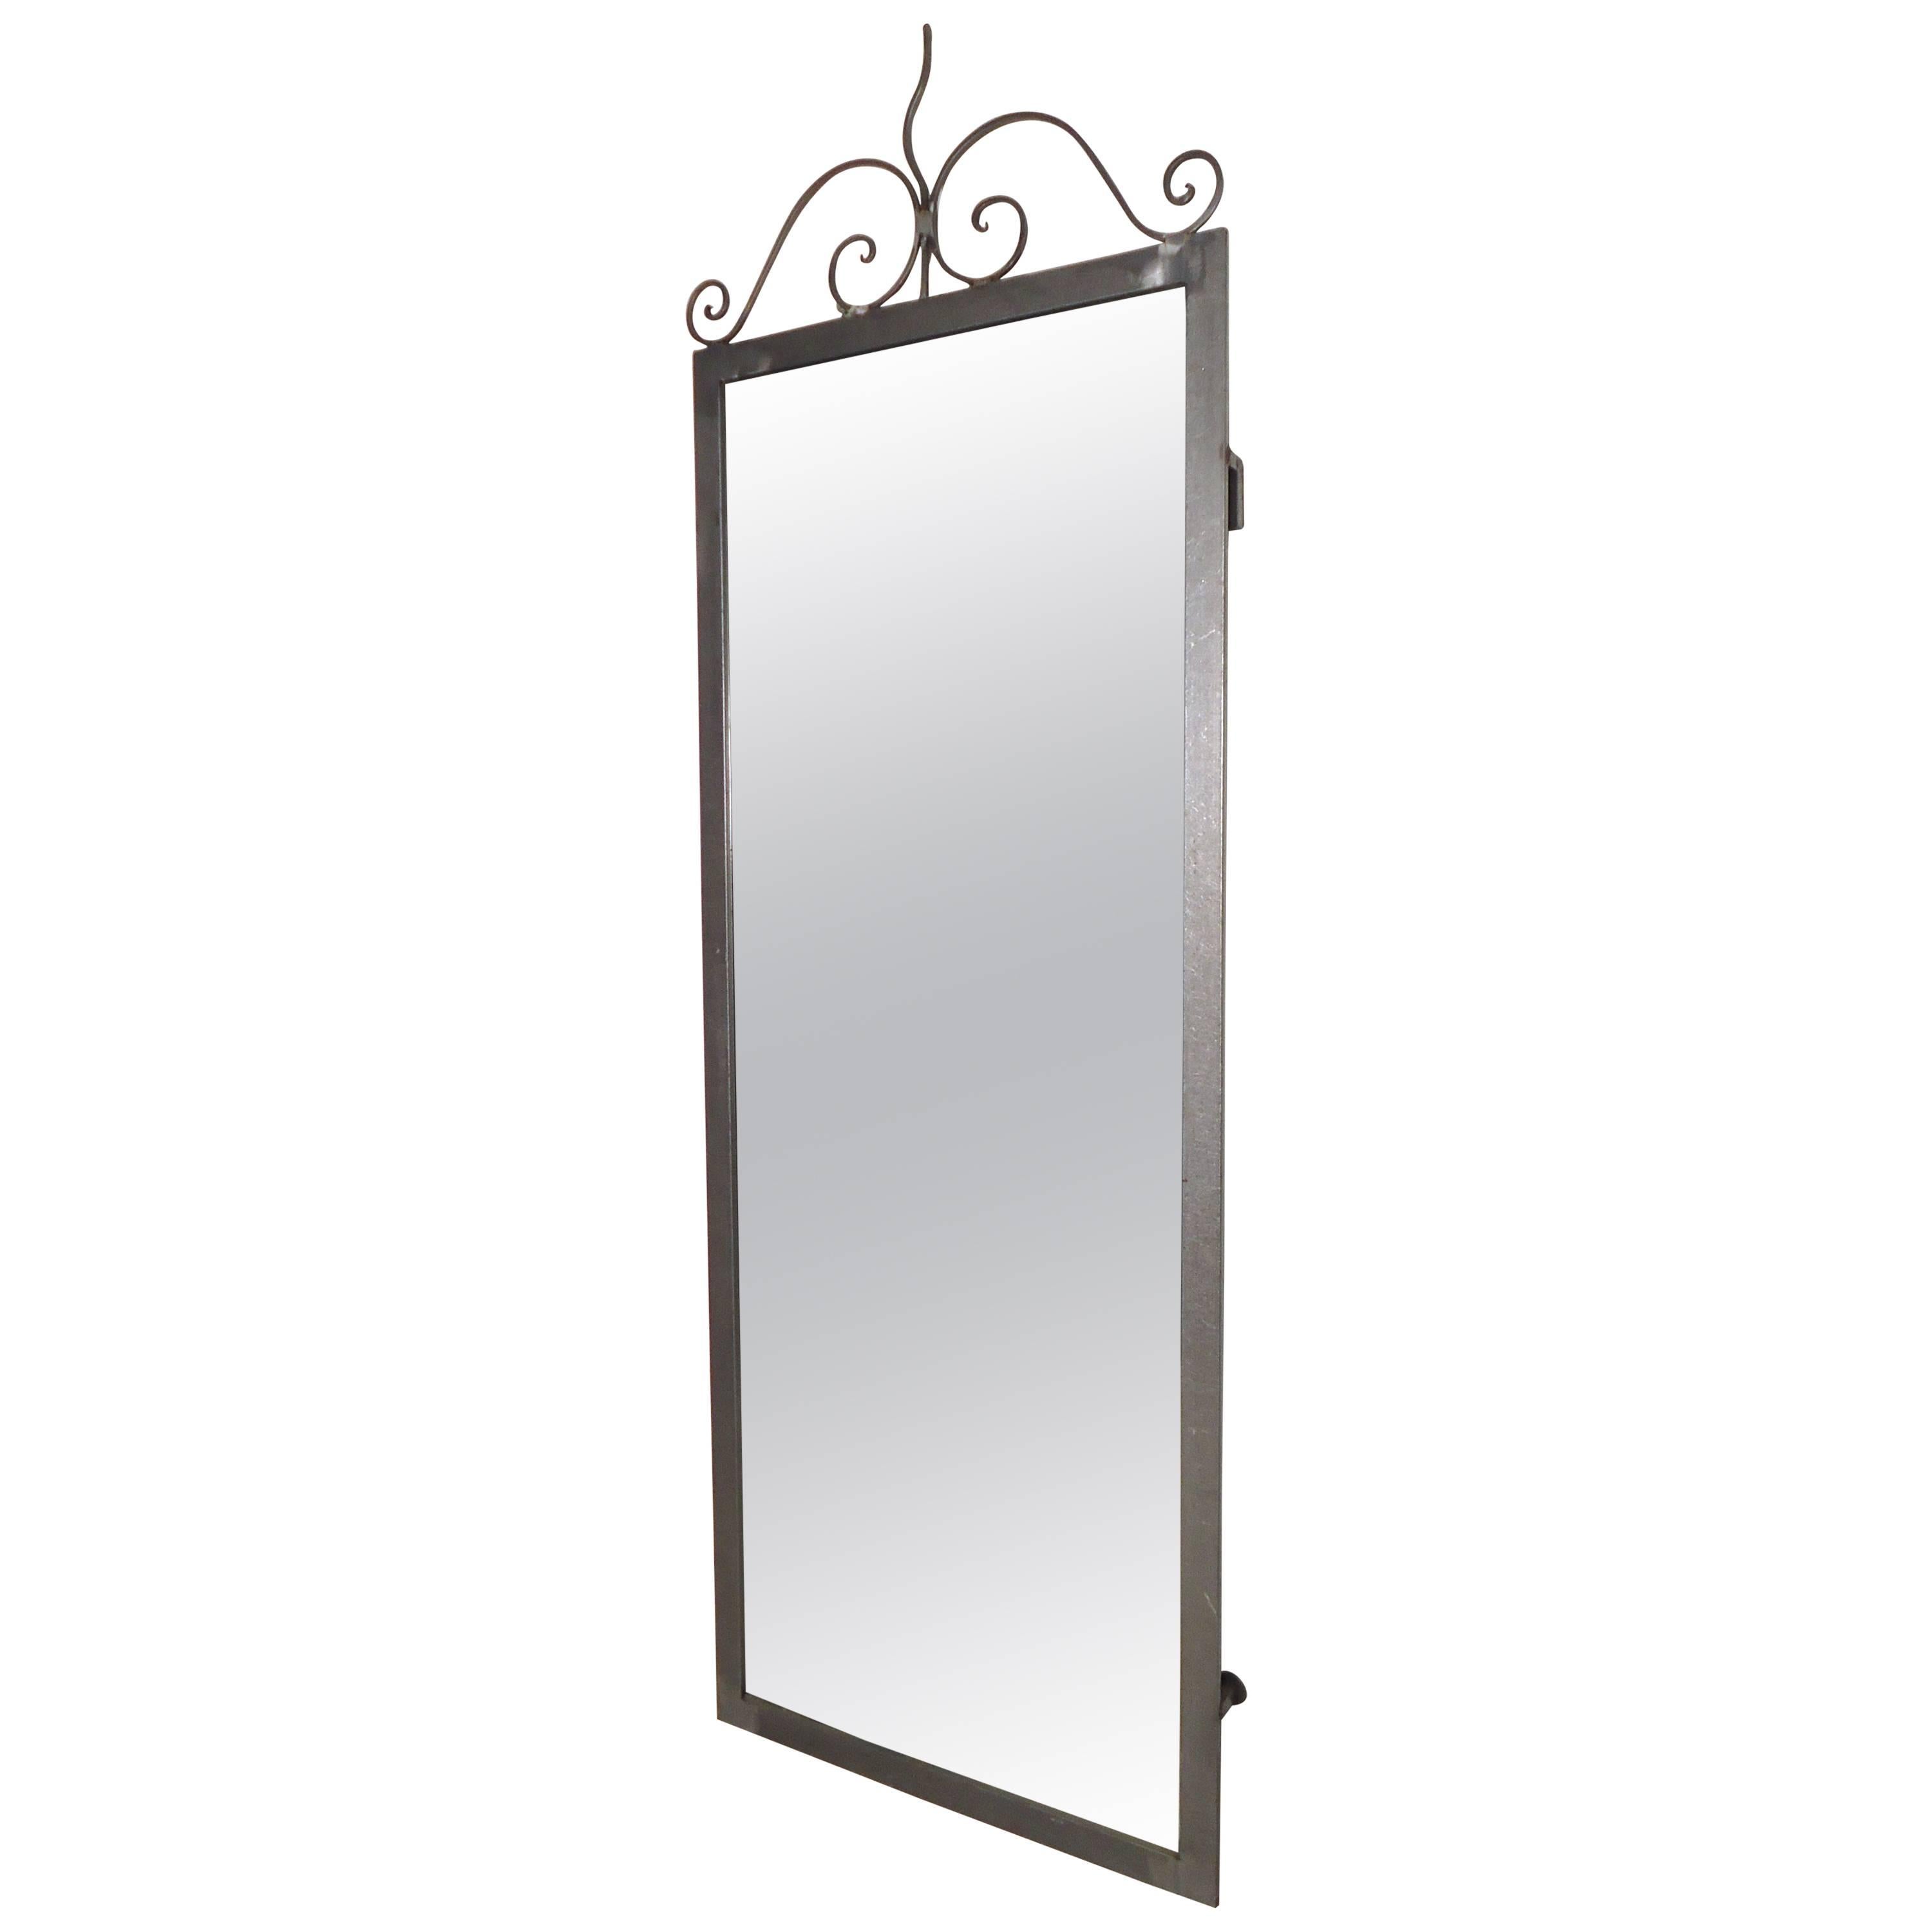 Featured image of post Vintage Industrial Industrial Style Mirror - Find a mixed bag of ideas and melded themes, plus accessories and cool accents that you can implement in your finishing touches.